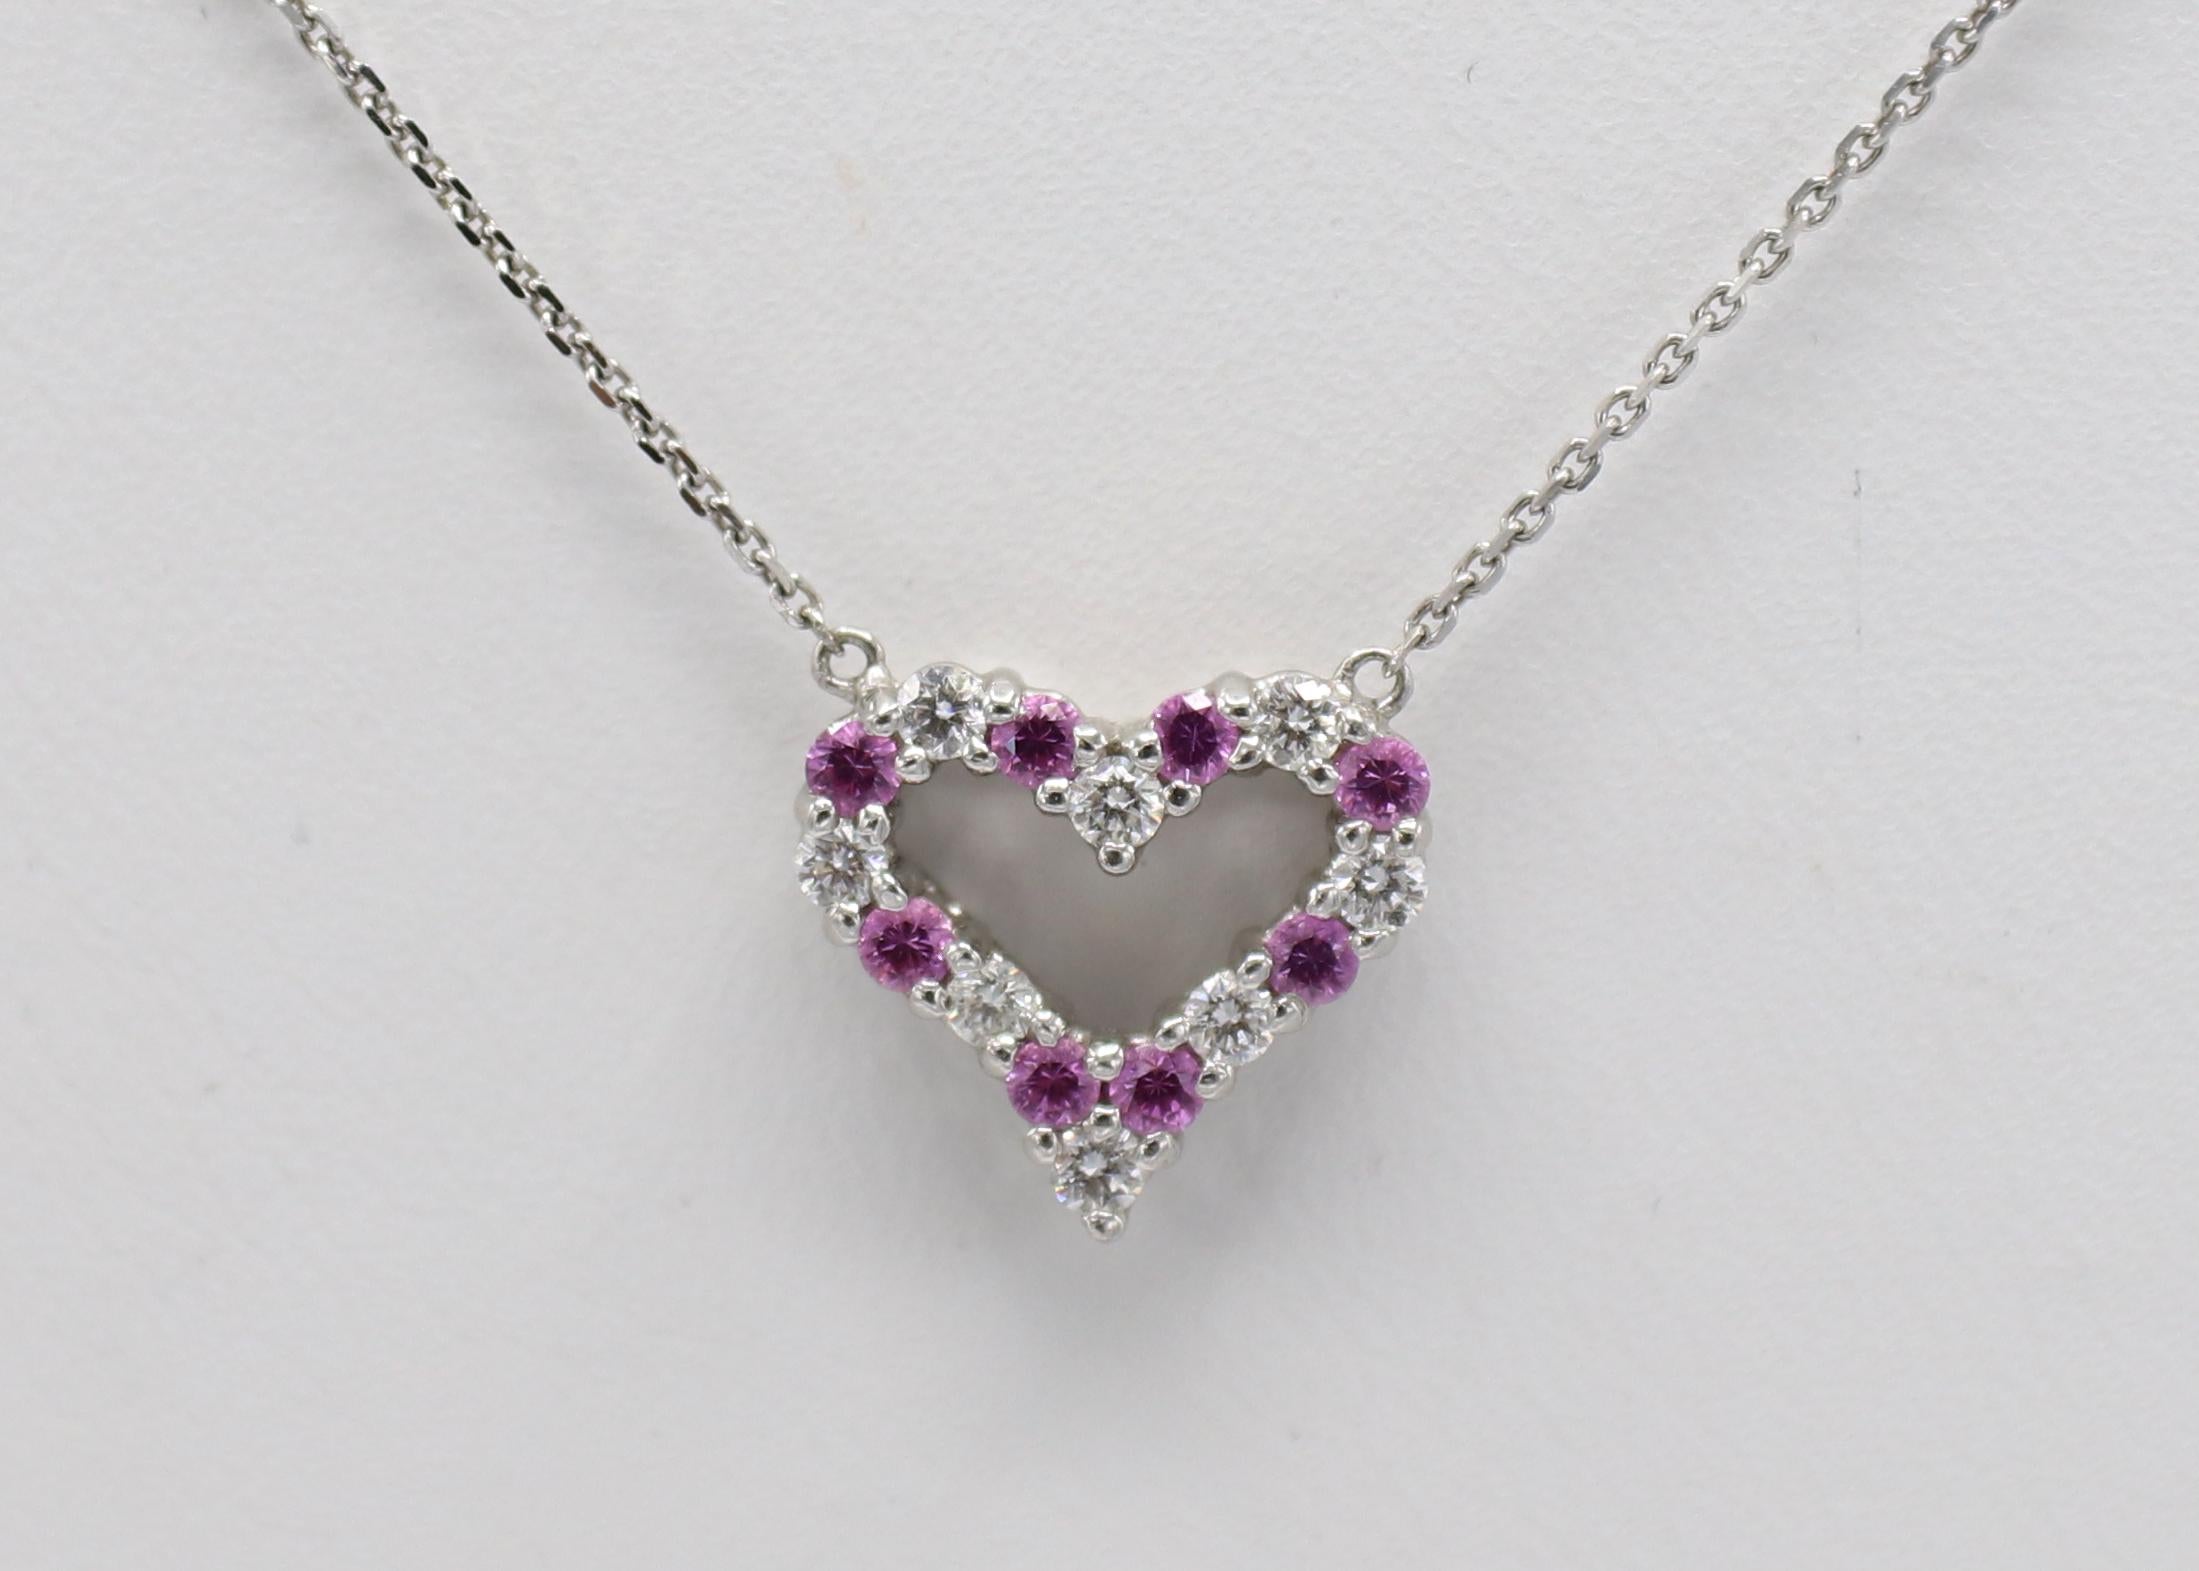 Tiffany & Co. Pink Sapphire & Diamond Sentimental Open Heart Pendant Necklace 
Metal: Platinum & 14k white gold (chain not Tiffany) 
Weight: 2.79 grams
Heart: 11.5 x 11mm
Length: 16 inches
Diamonds: Approx. .16 CTW G VS
